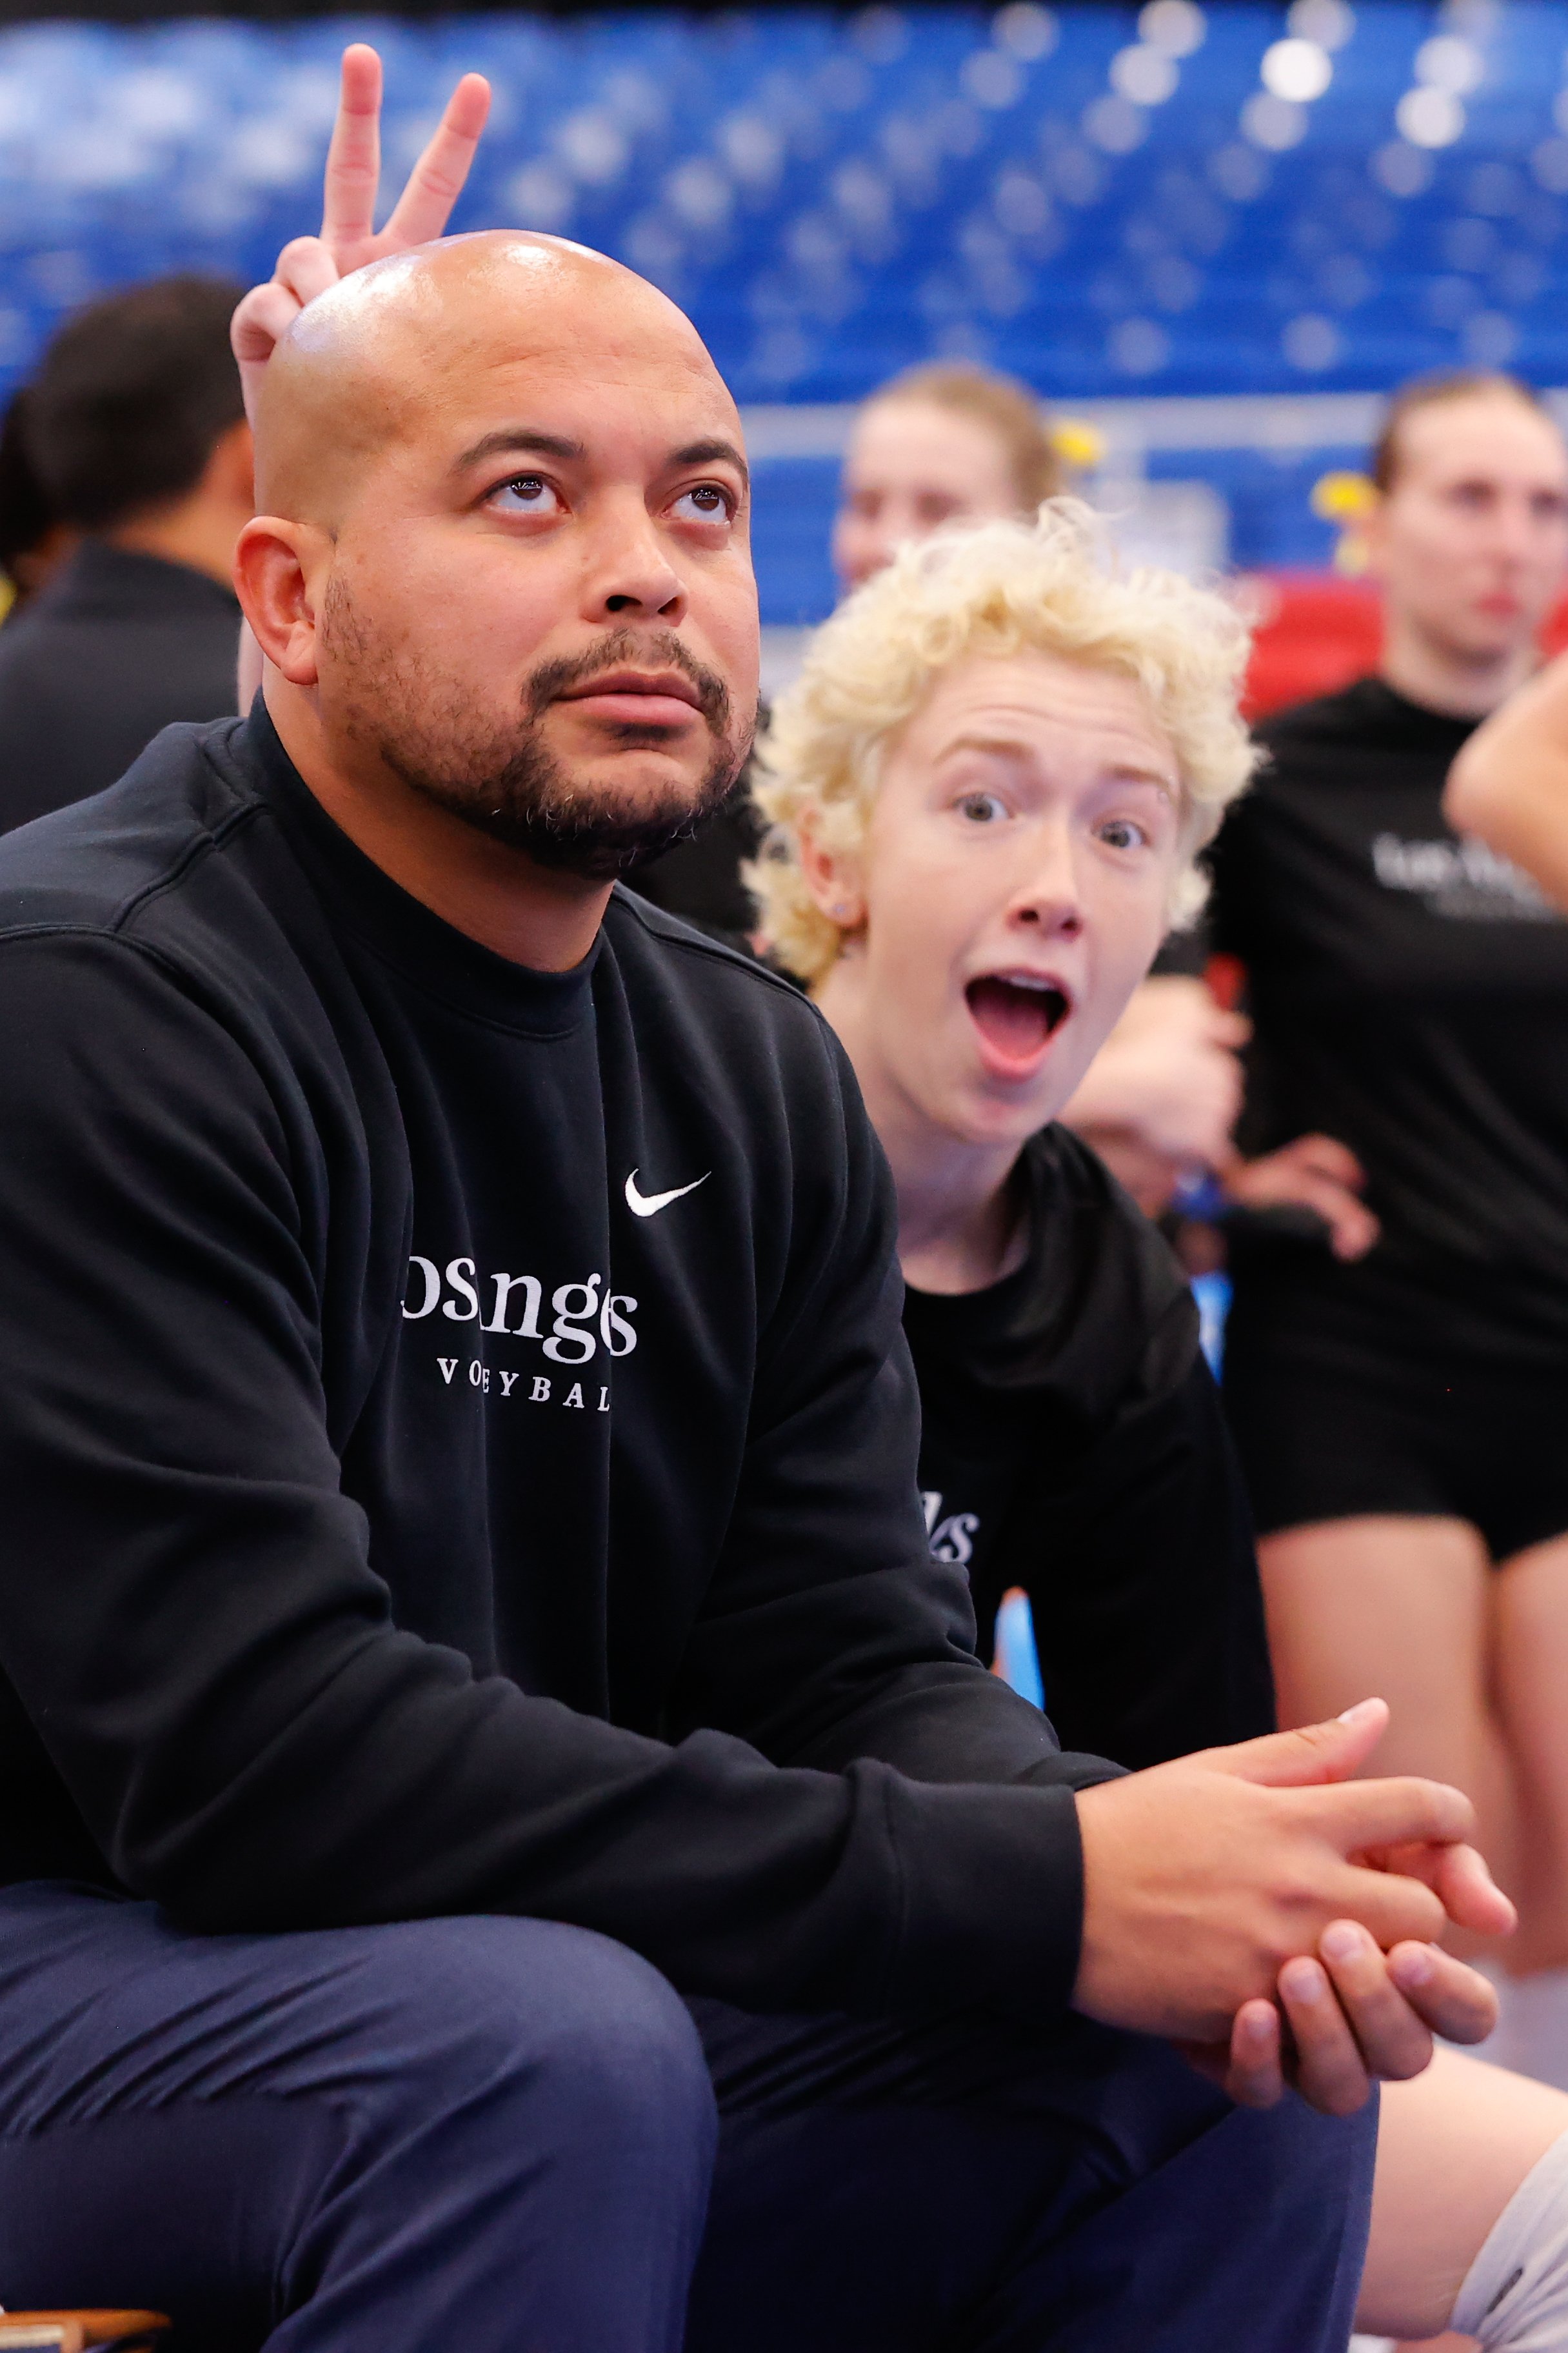  MOON TOWNSHIP, PENNSYLVANIA - DECEMBER 9: Head coach Juan Figueroa of Cal State Los Angeles is photo bombed before the game by Jameson Sanders #14 of Cal State during the Division II Women's Volleyball Championship held at UPMC Events Center on Dece